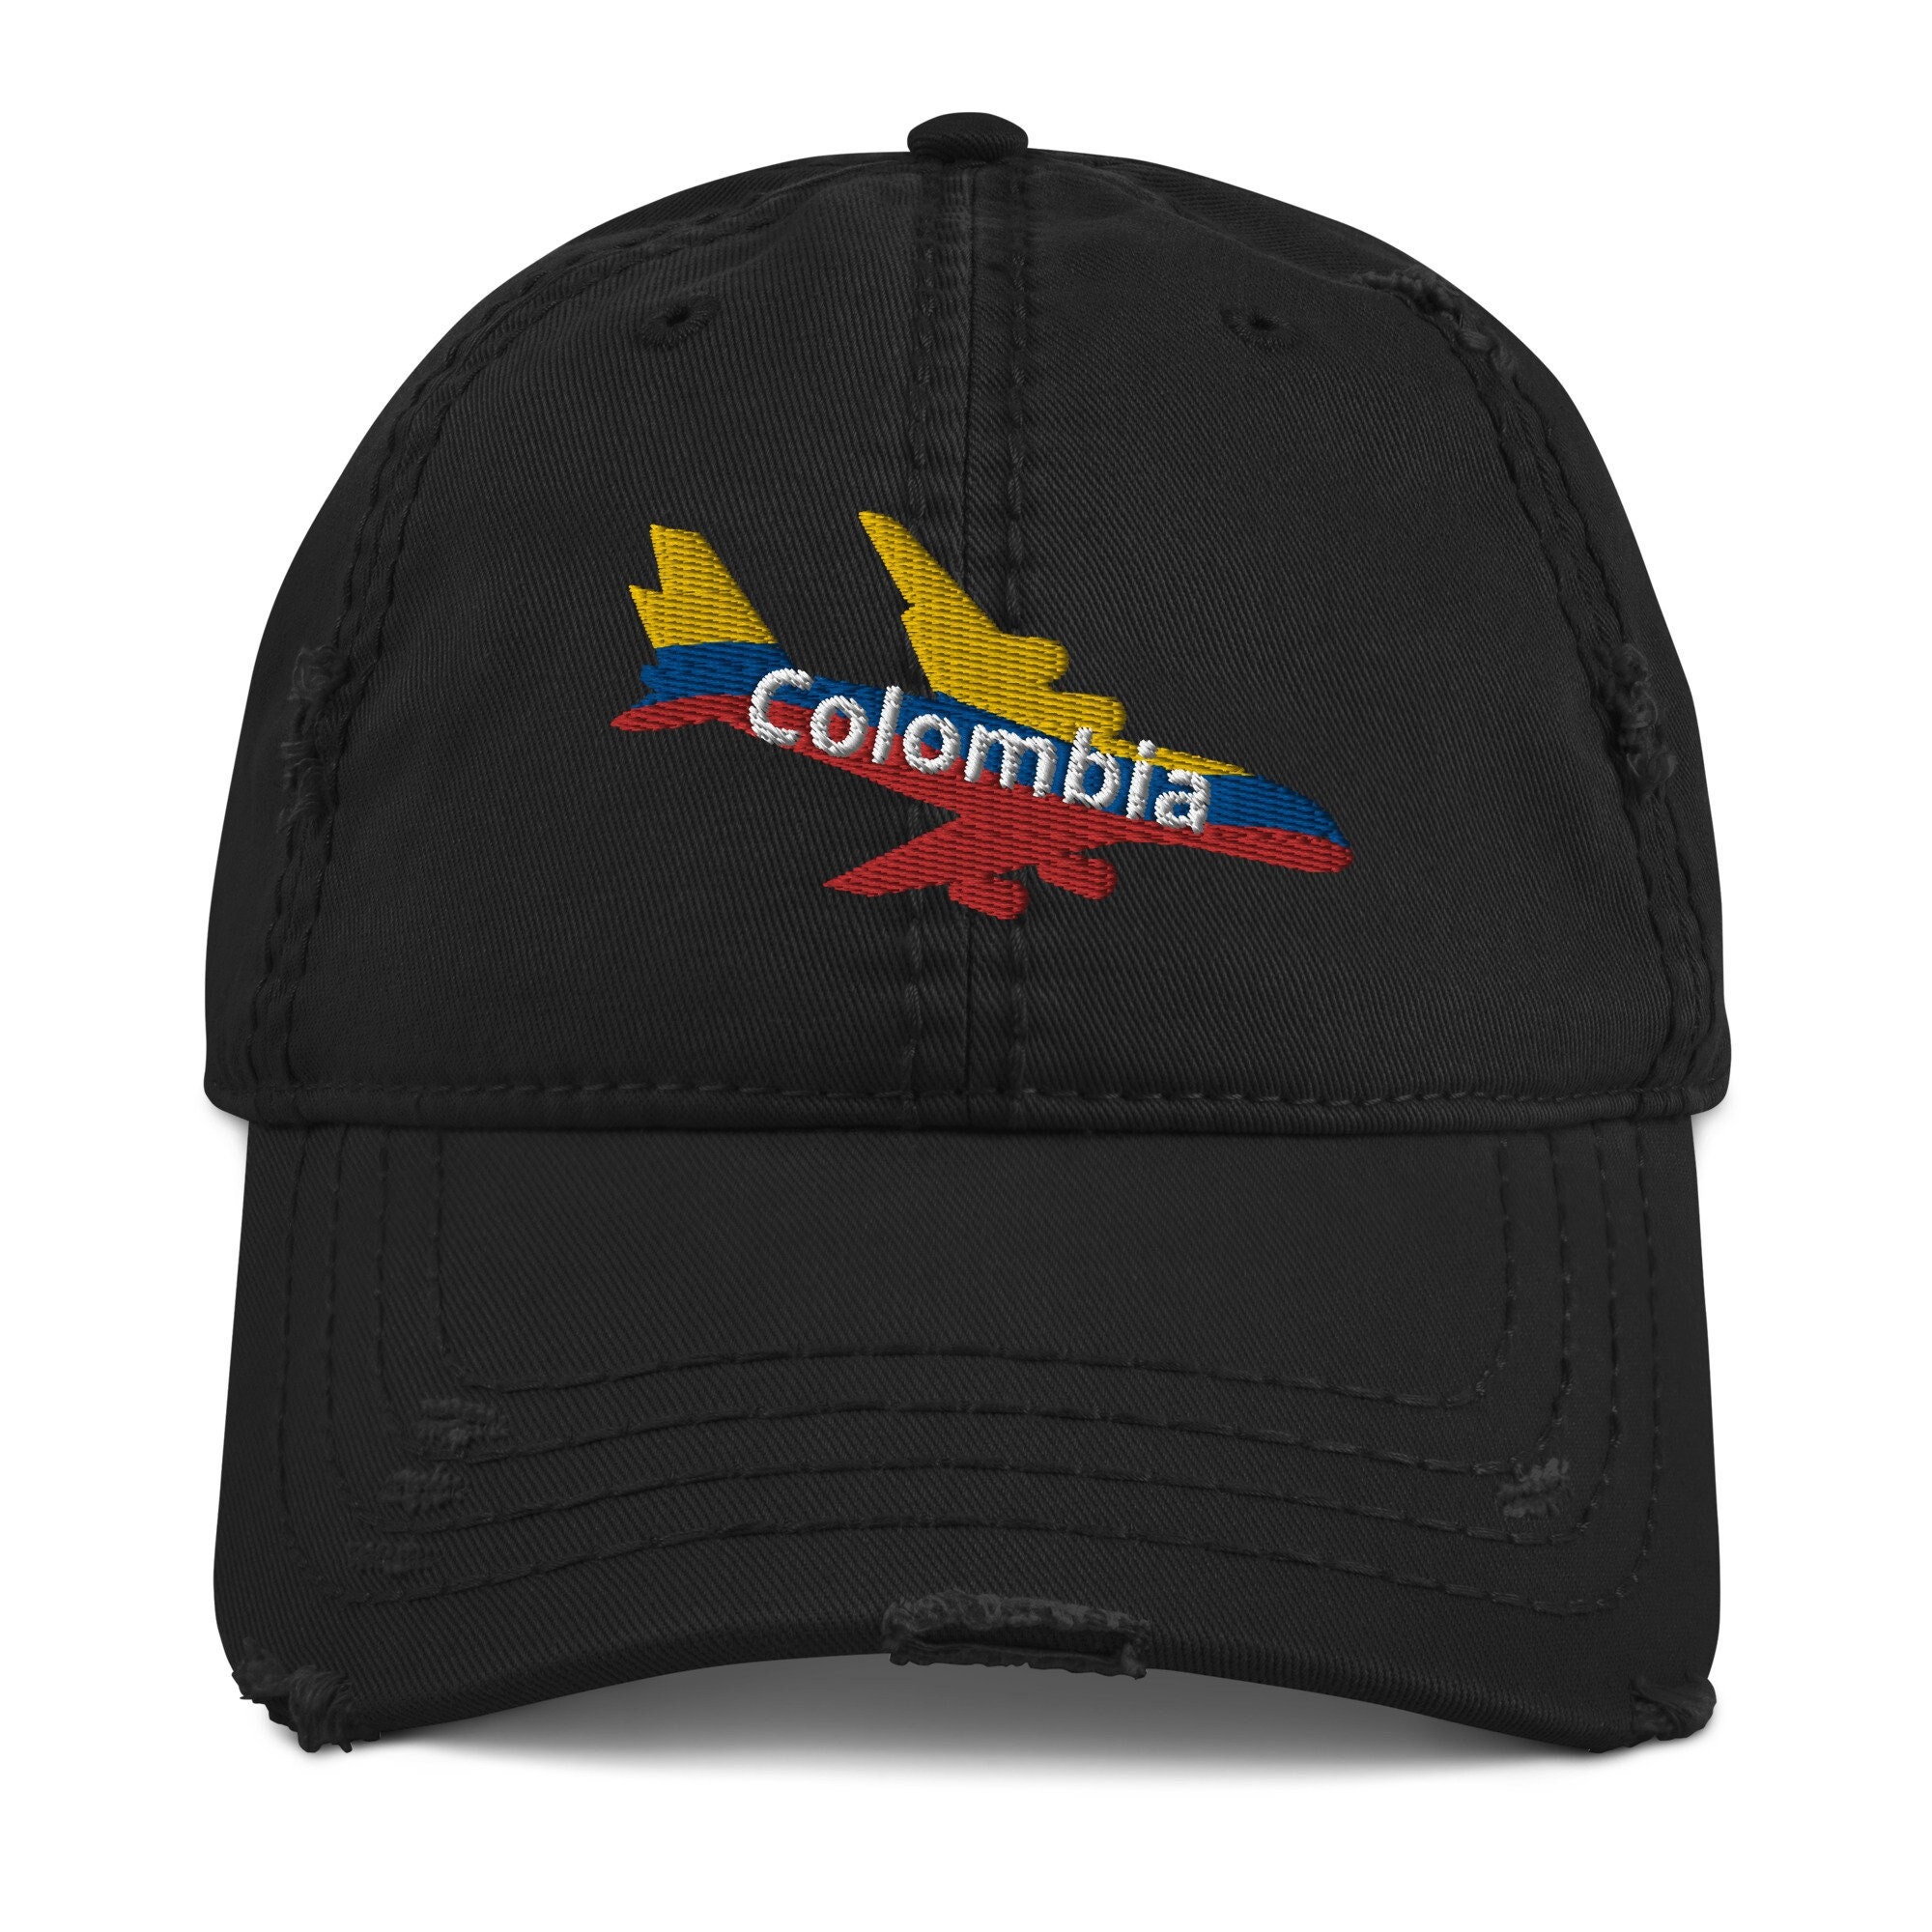 Colombia Hat, Colombian Flag Color Hat, Colombia Airplane Hat